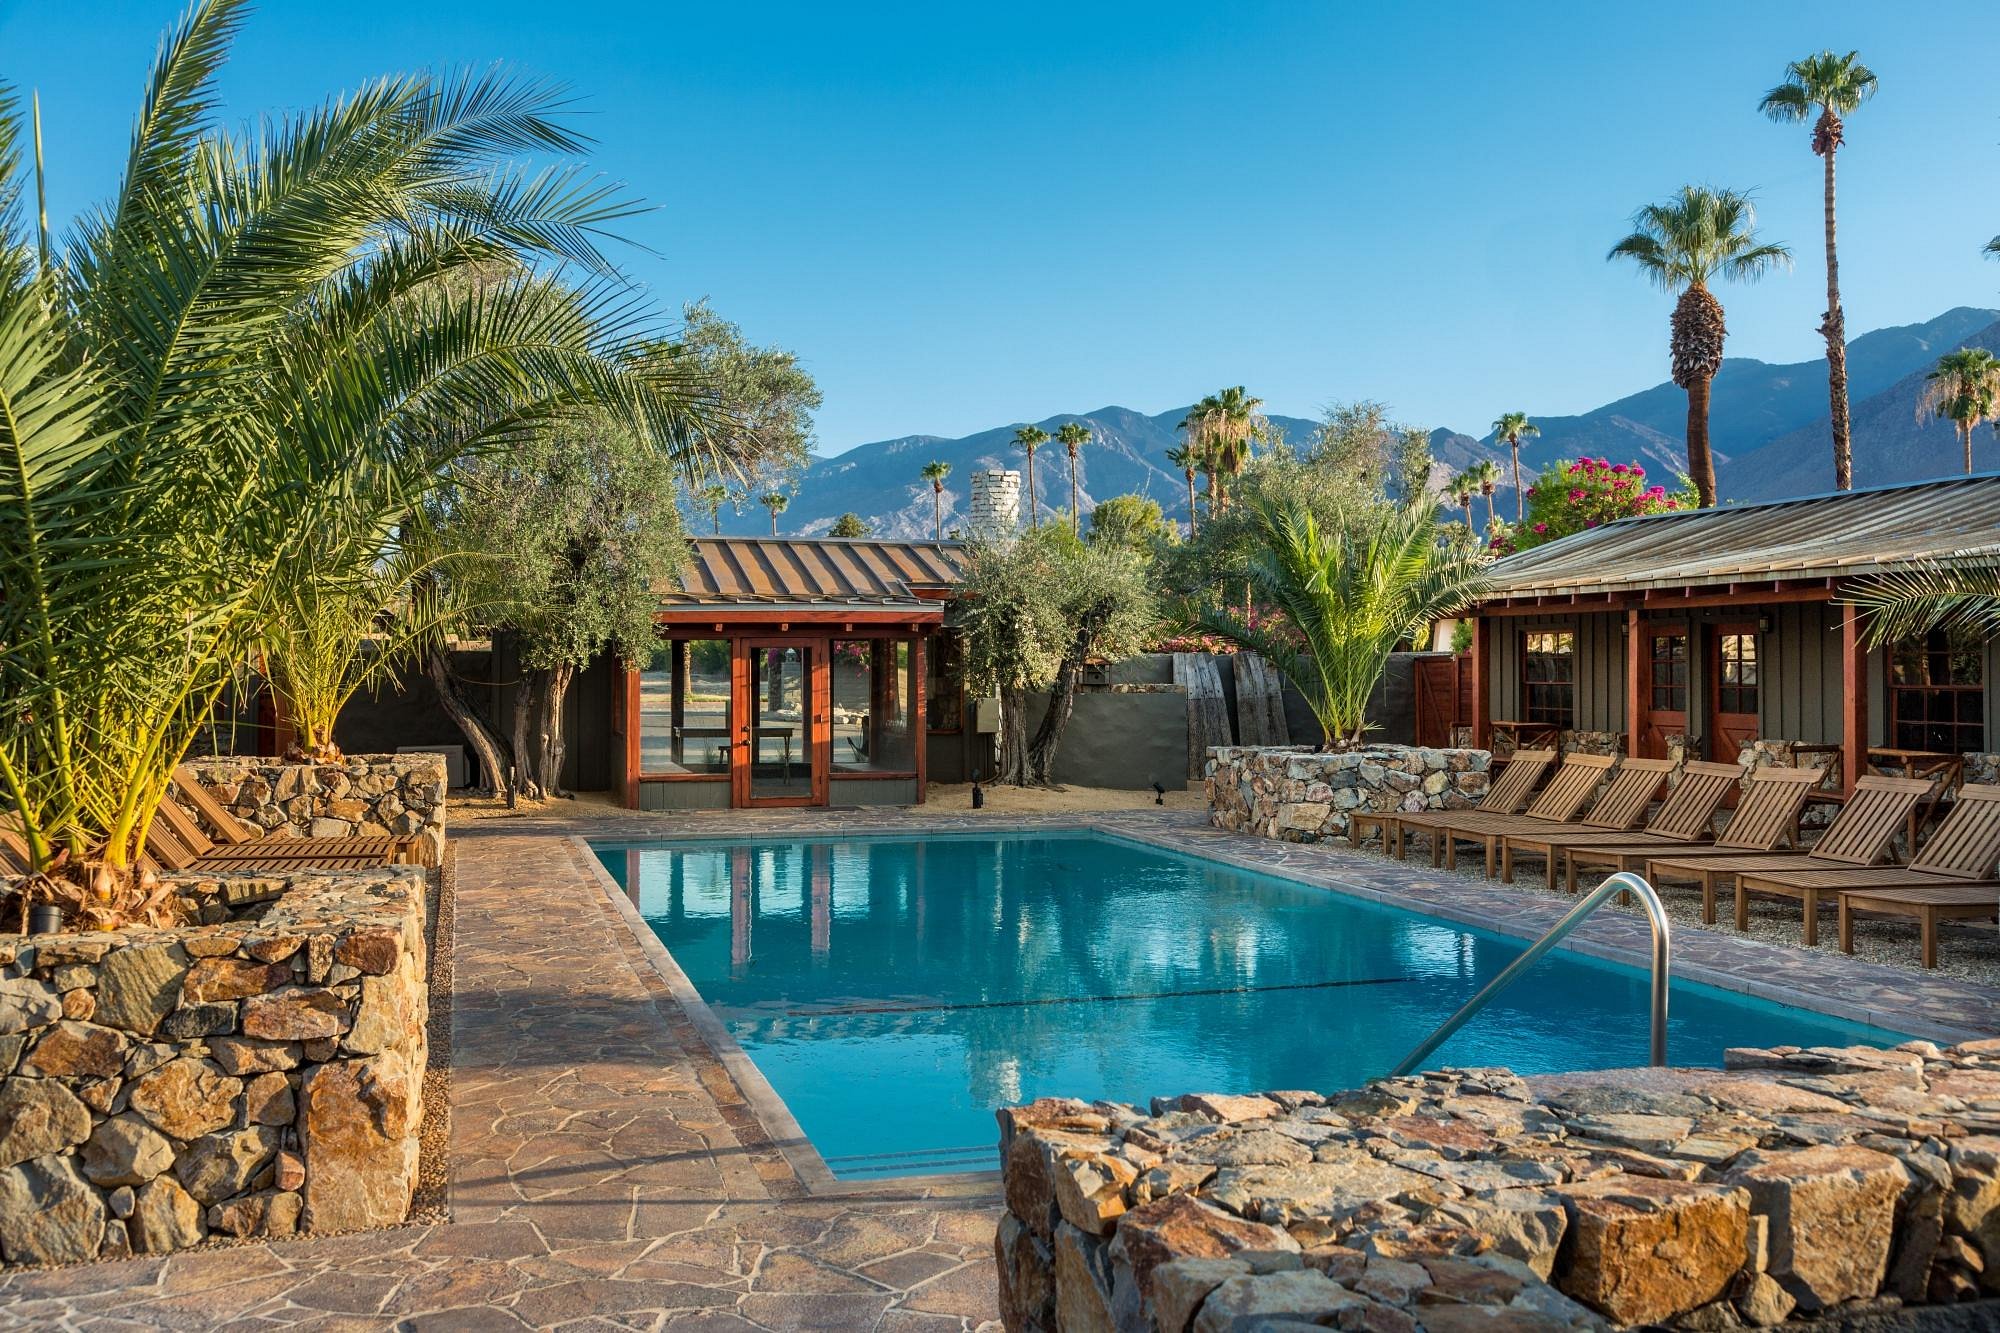 Rocky ledges and palms surround the beautiful pool at Sparrows Lodge Hotel in Palm Springs, California